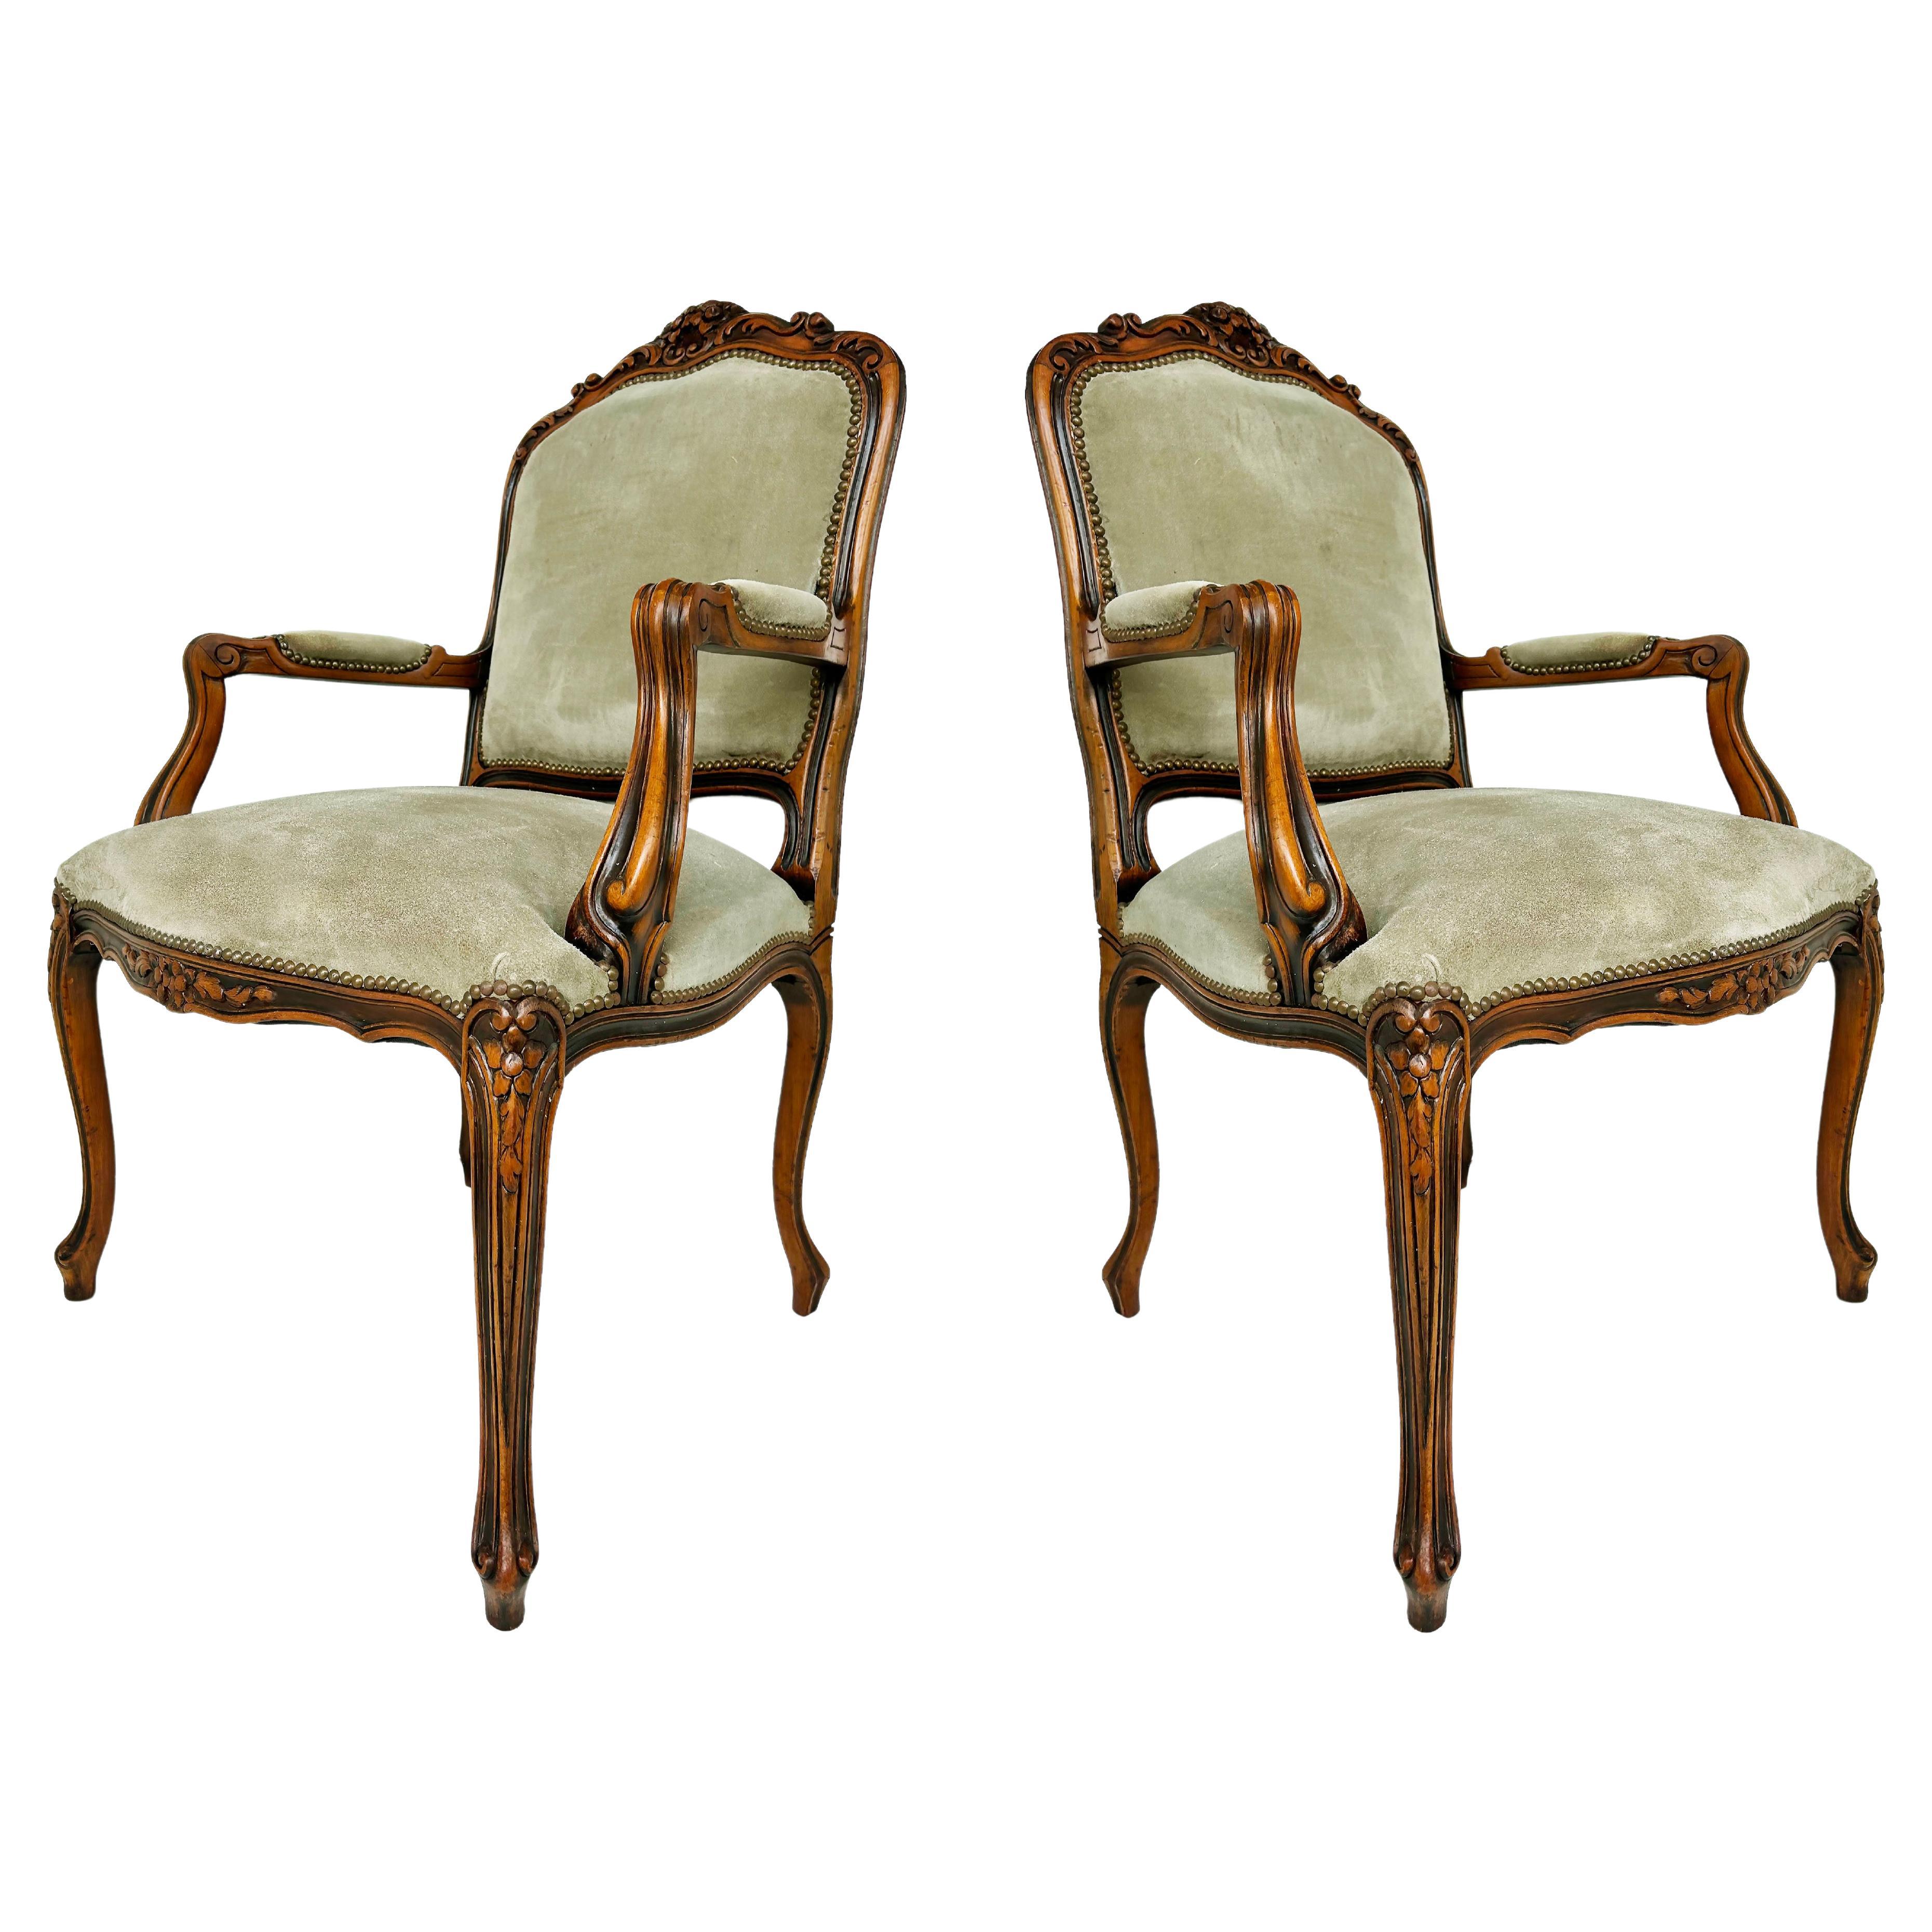 Italian Chateau d'Ax Carved Armchairs in Suede with Brass NailHeads, Pair For Sale